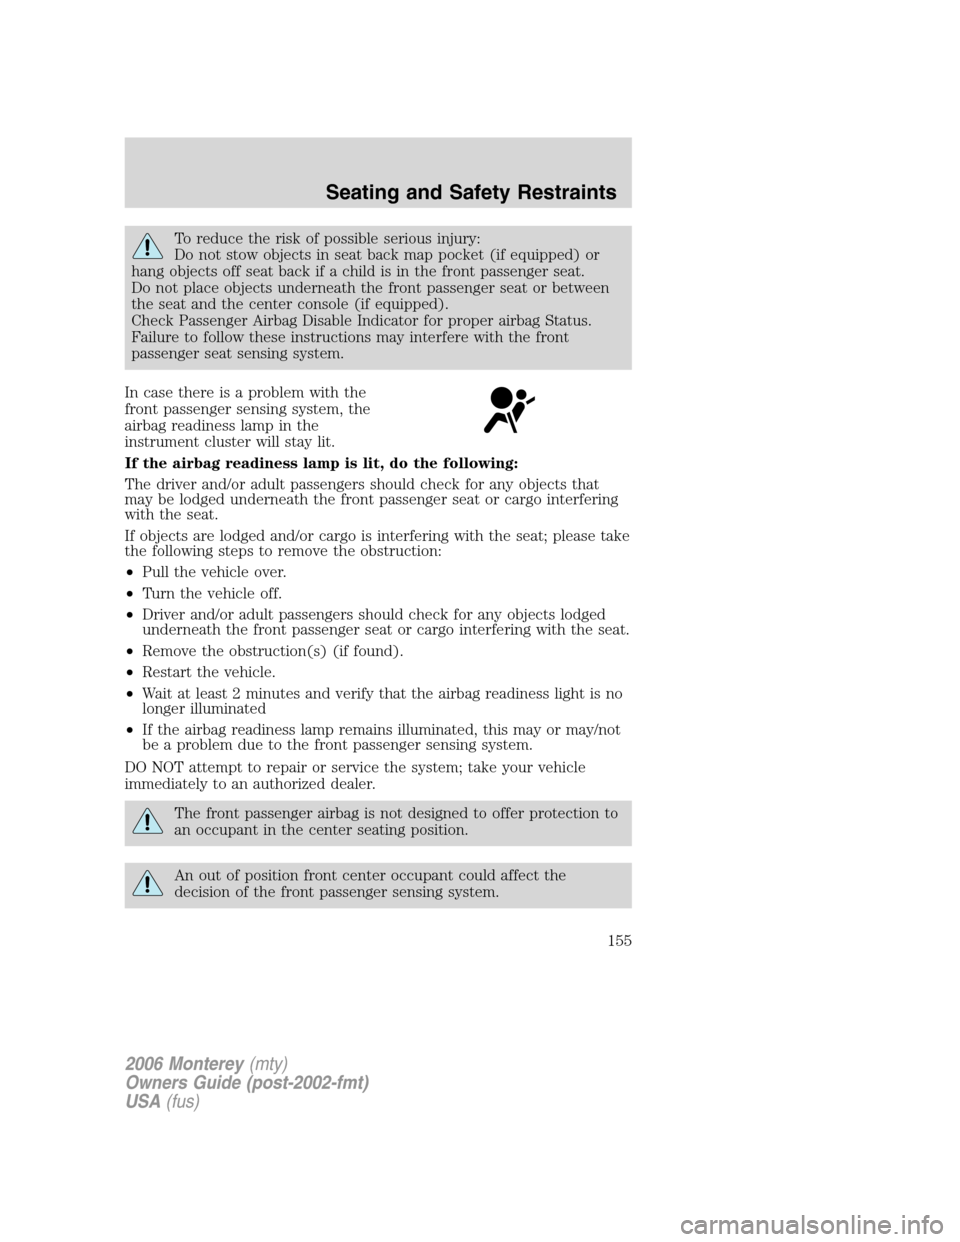 Mercury Monterey 2006  Owners Manuals To reduce the risk of possible serious injury:
Do not stow objects in seat back map pocket (if equipped) or
hang objects off seat back if a child is in the front passenger seat.
Do not place objects u